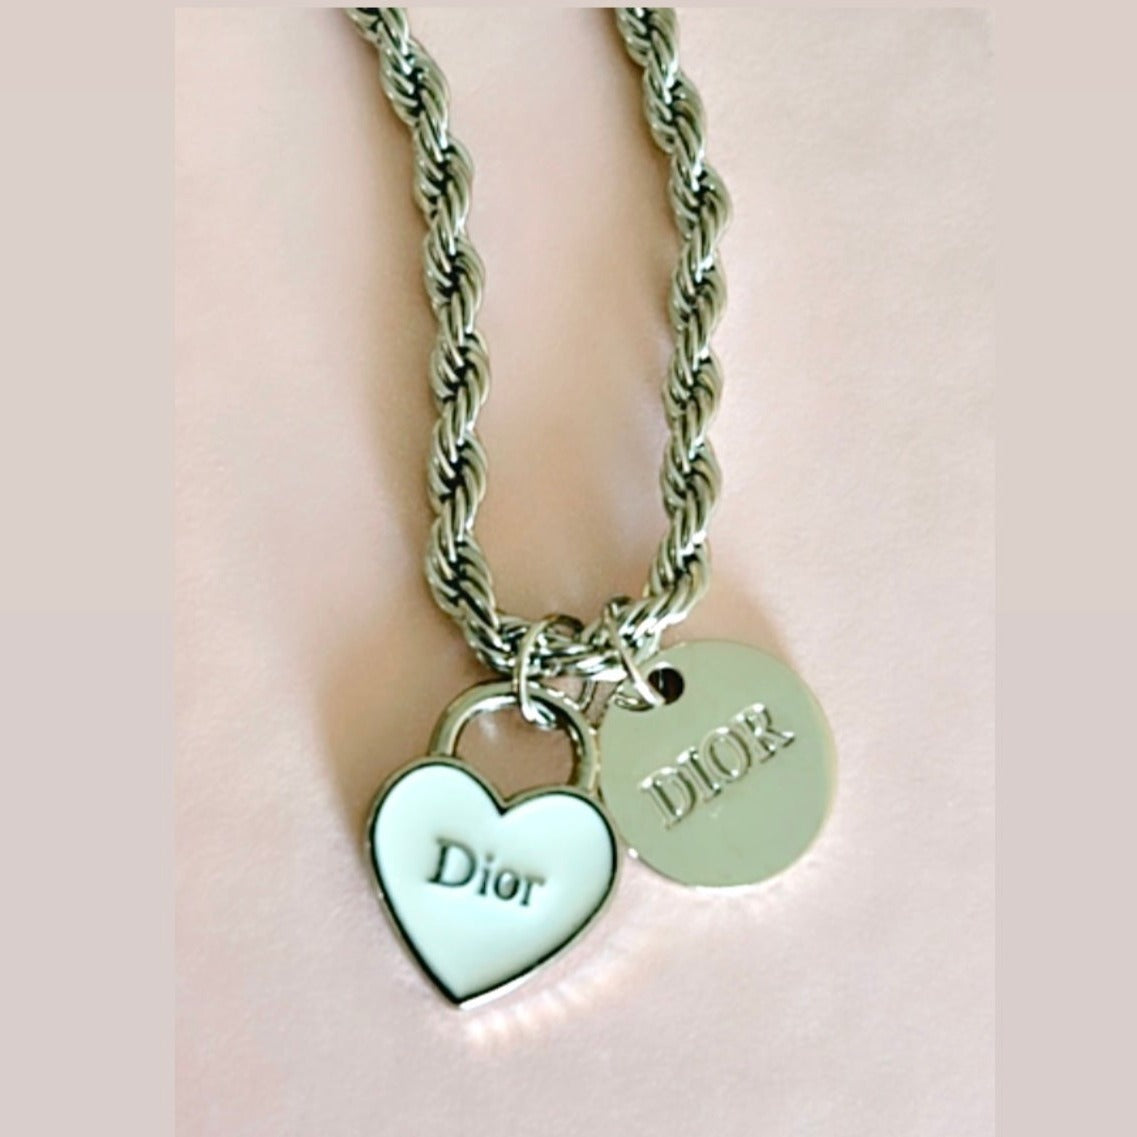 The Dee Dee Necklace in Silver- available in 2 colors